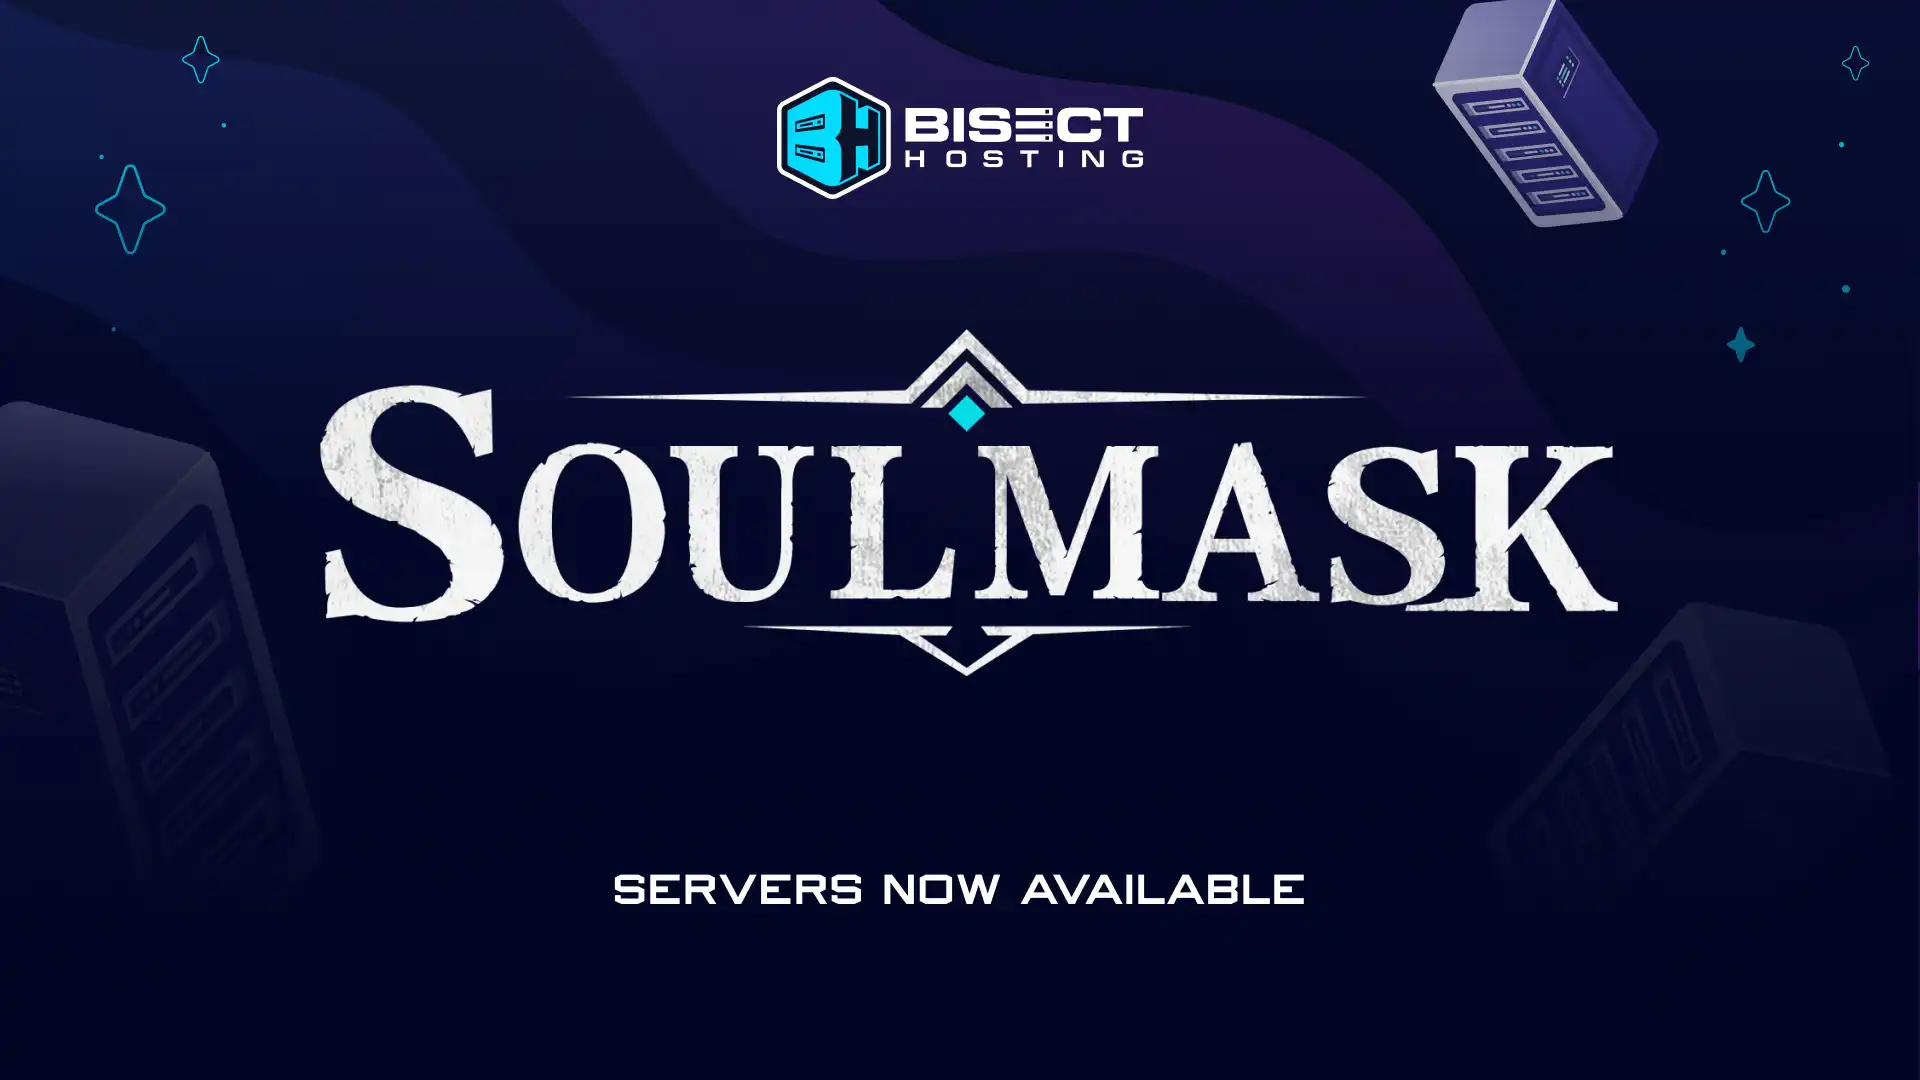 Soulmask Dedicated Server Hosting Available Now with BisectHosting